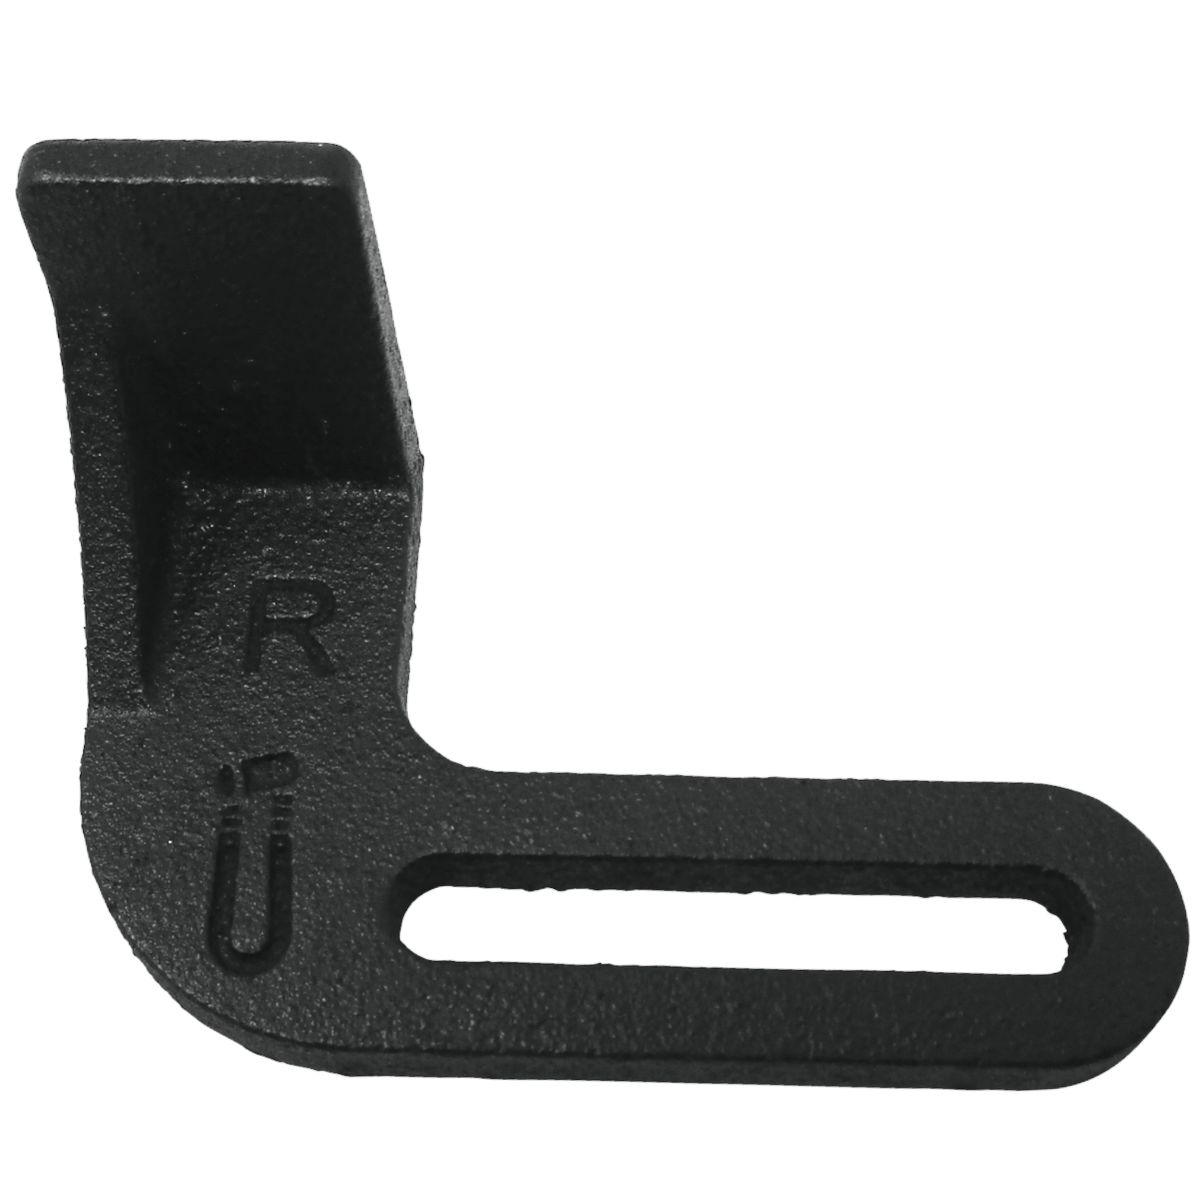 Jet JBG6A -28 Right Hand Tool Rest for JBG6A Tool